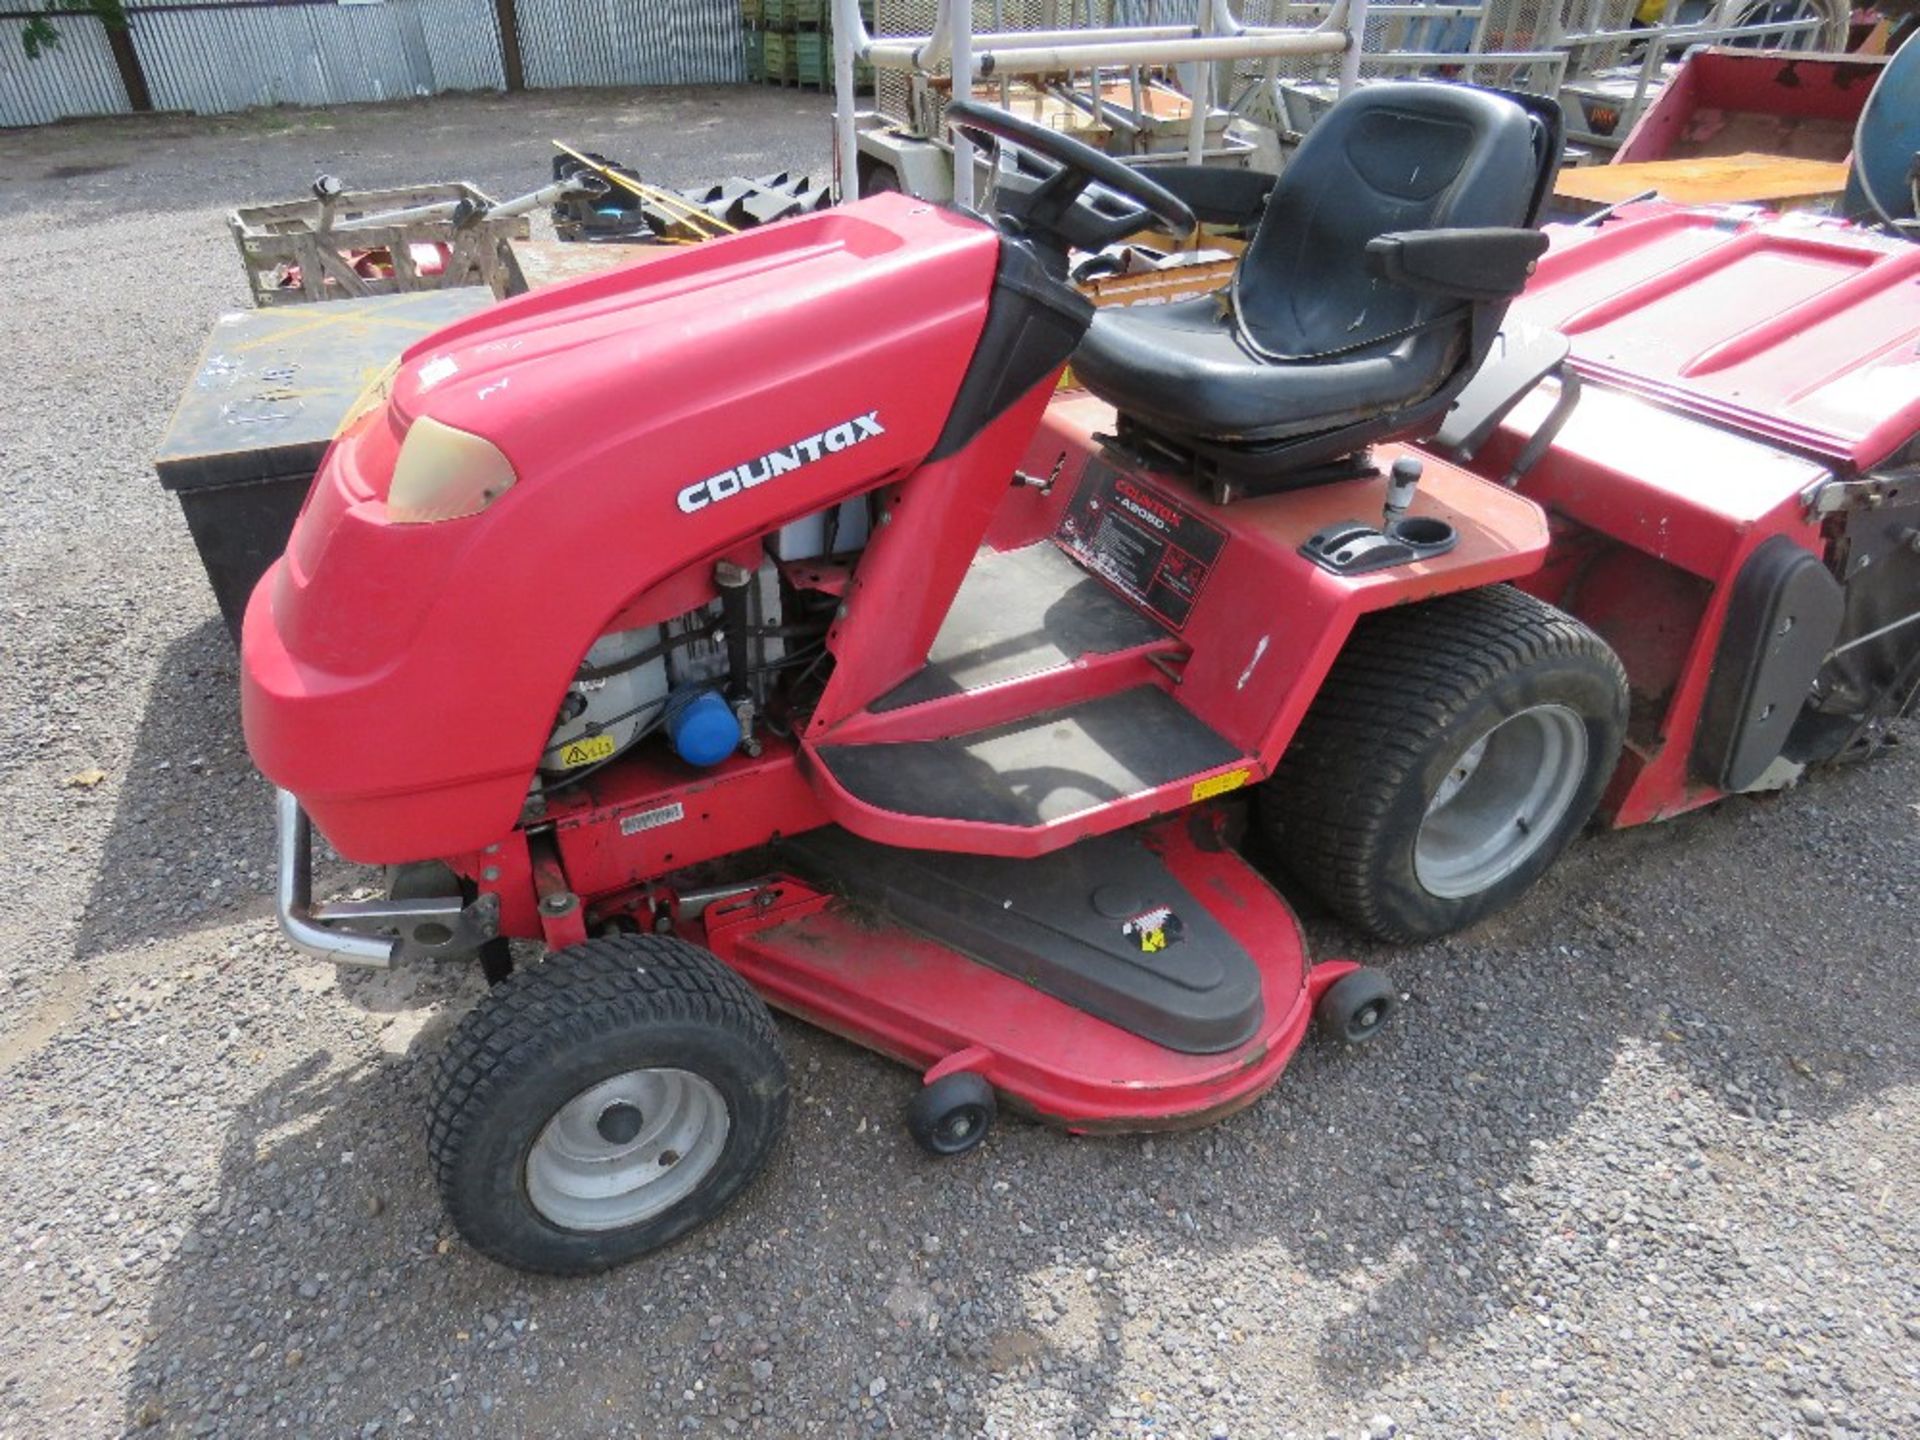 COUNTAX A2050 RIDE ON MOWER WITH COLLECTOR. WHEN TESTED WAS SEEN TO RUN, DRIVE AND MOWERS TURNED. CO